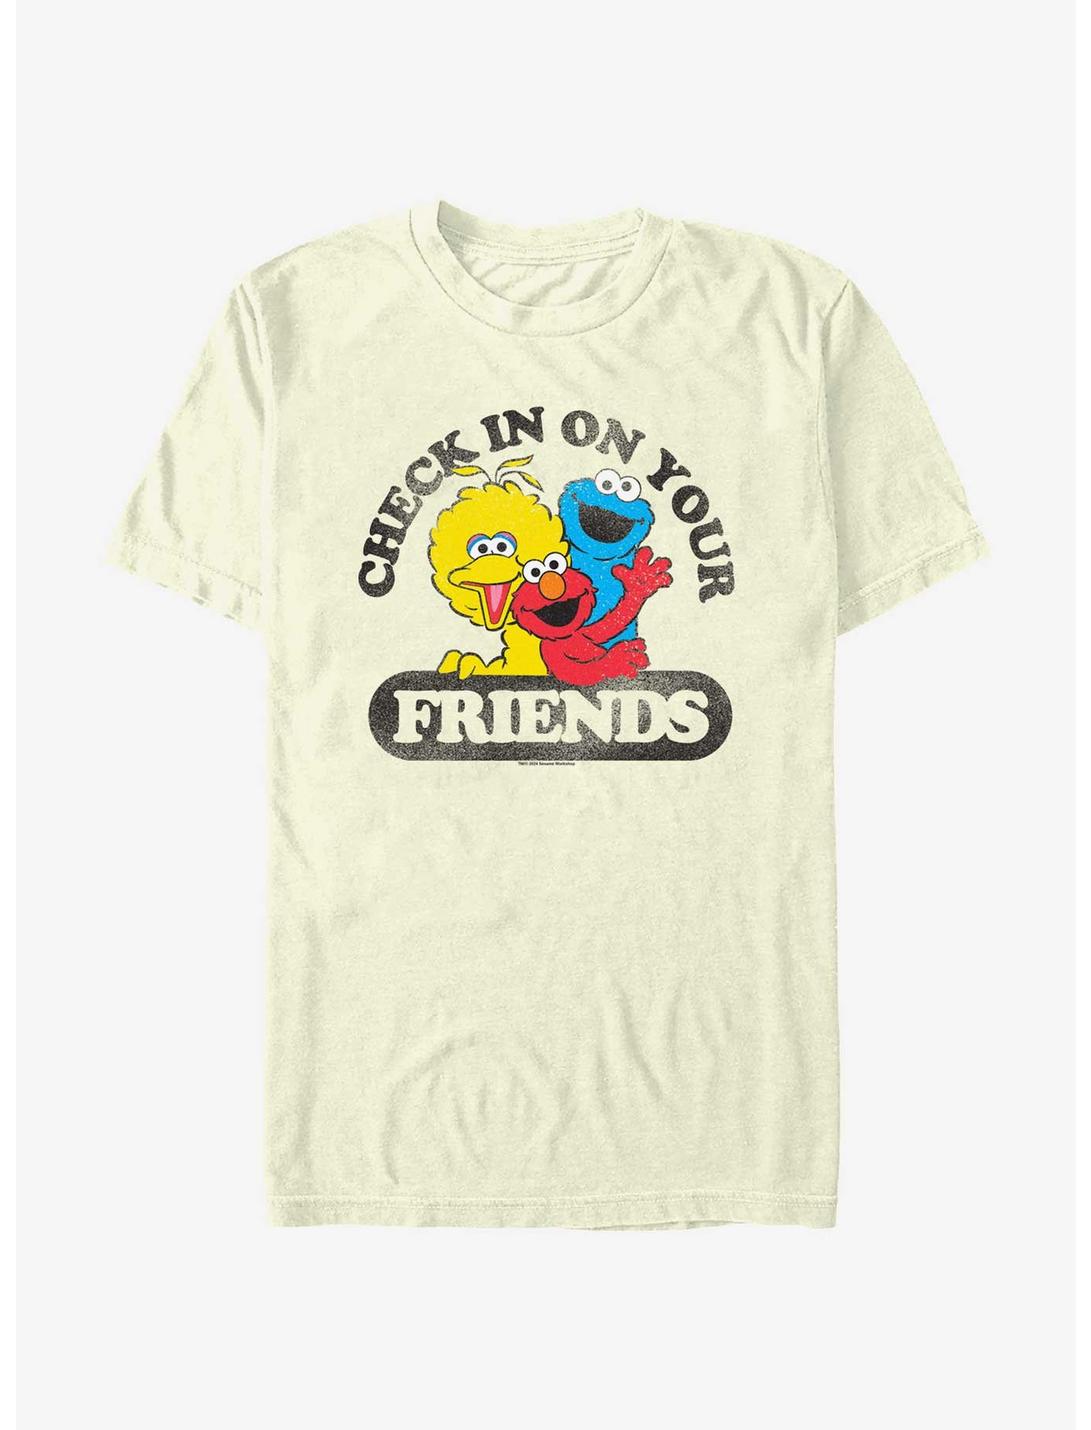 Sesame Street Check In On Your Friends Big Bird Cookie Monster and Elmo T-Shirt, NATURAL, hi-res